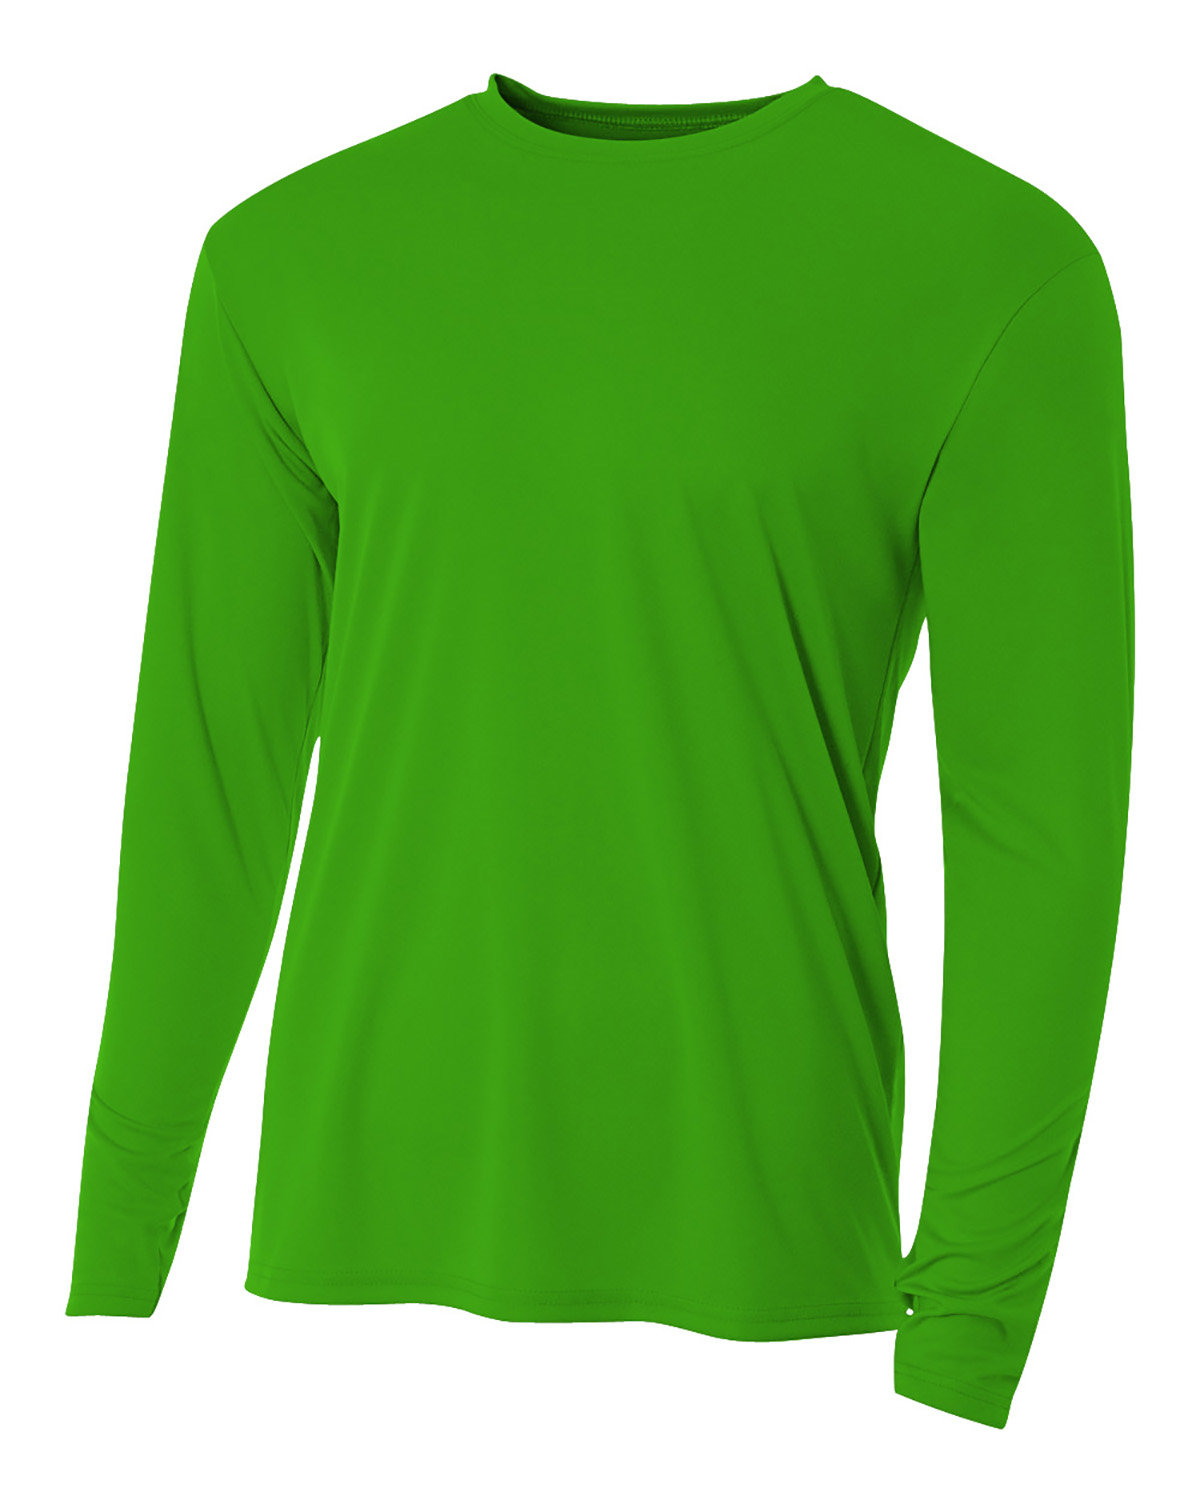 Long-sleeve t-shirts for Men